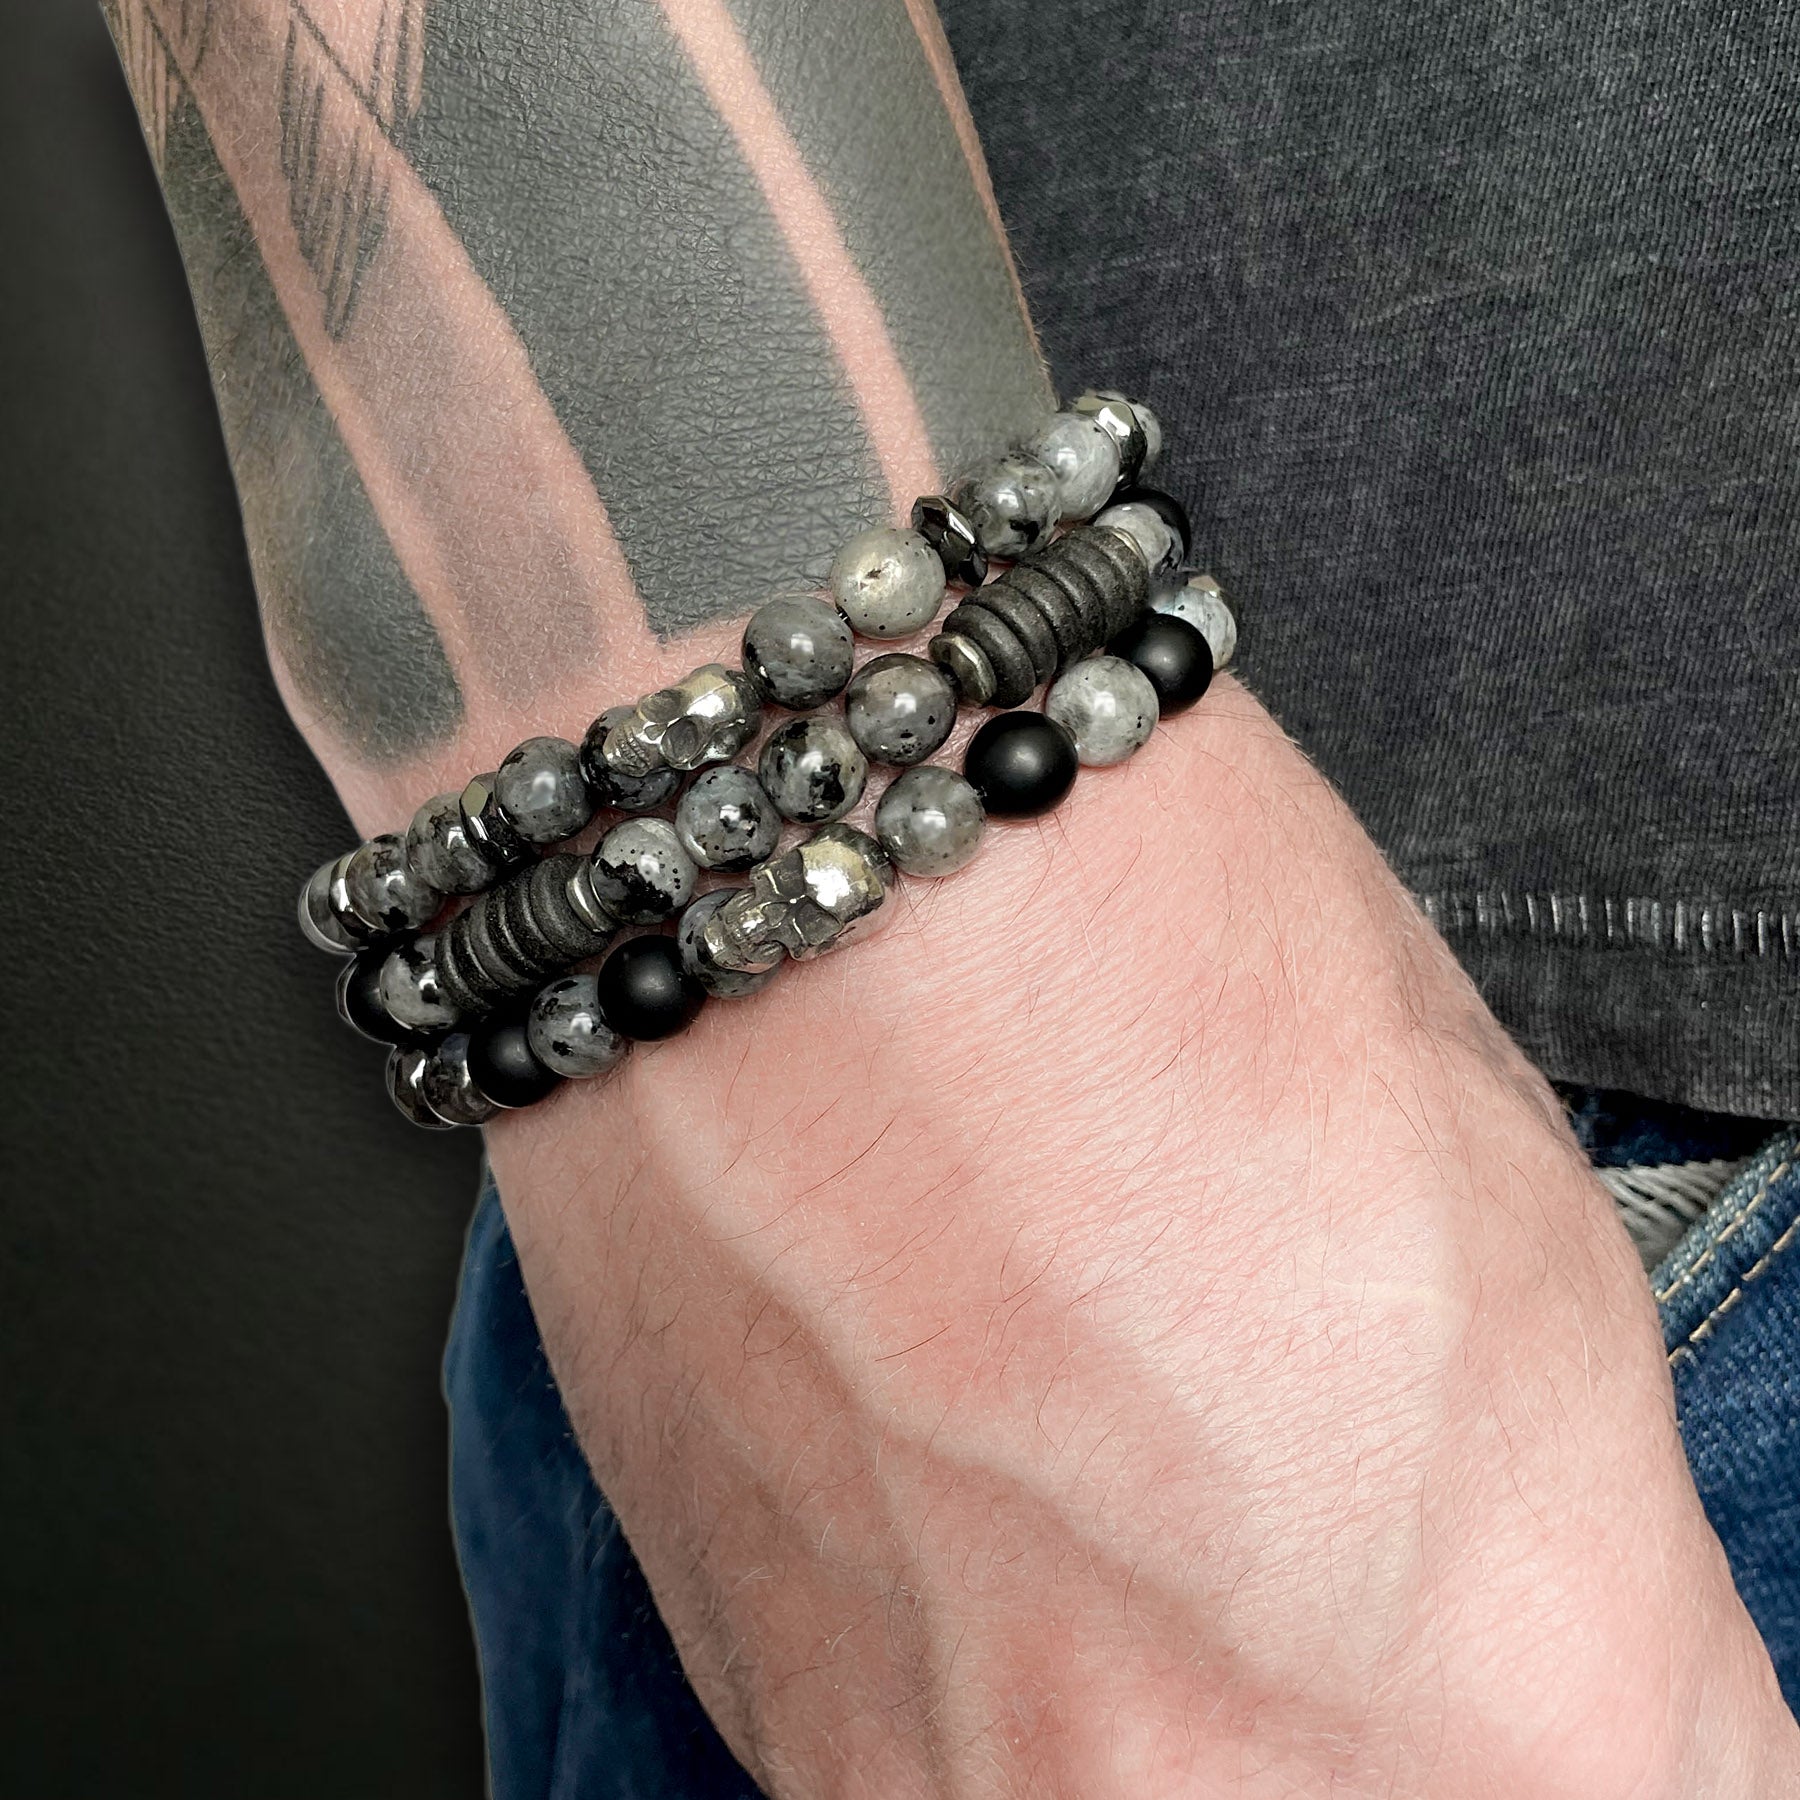 Grey and black sinister skull bracelet by Rock My Wings